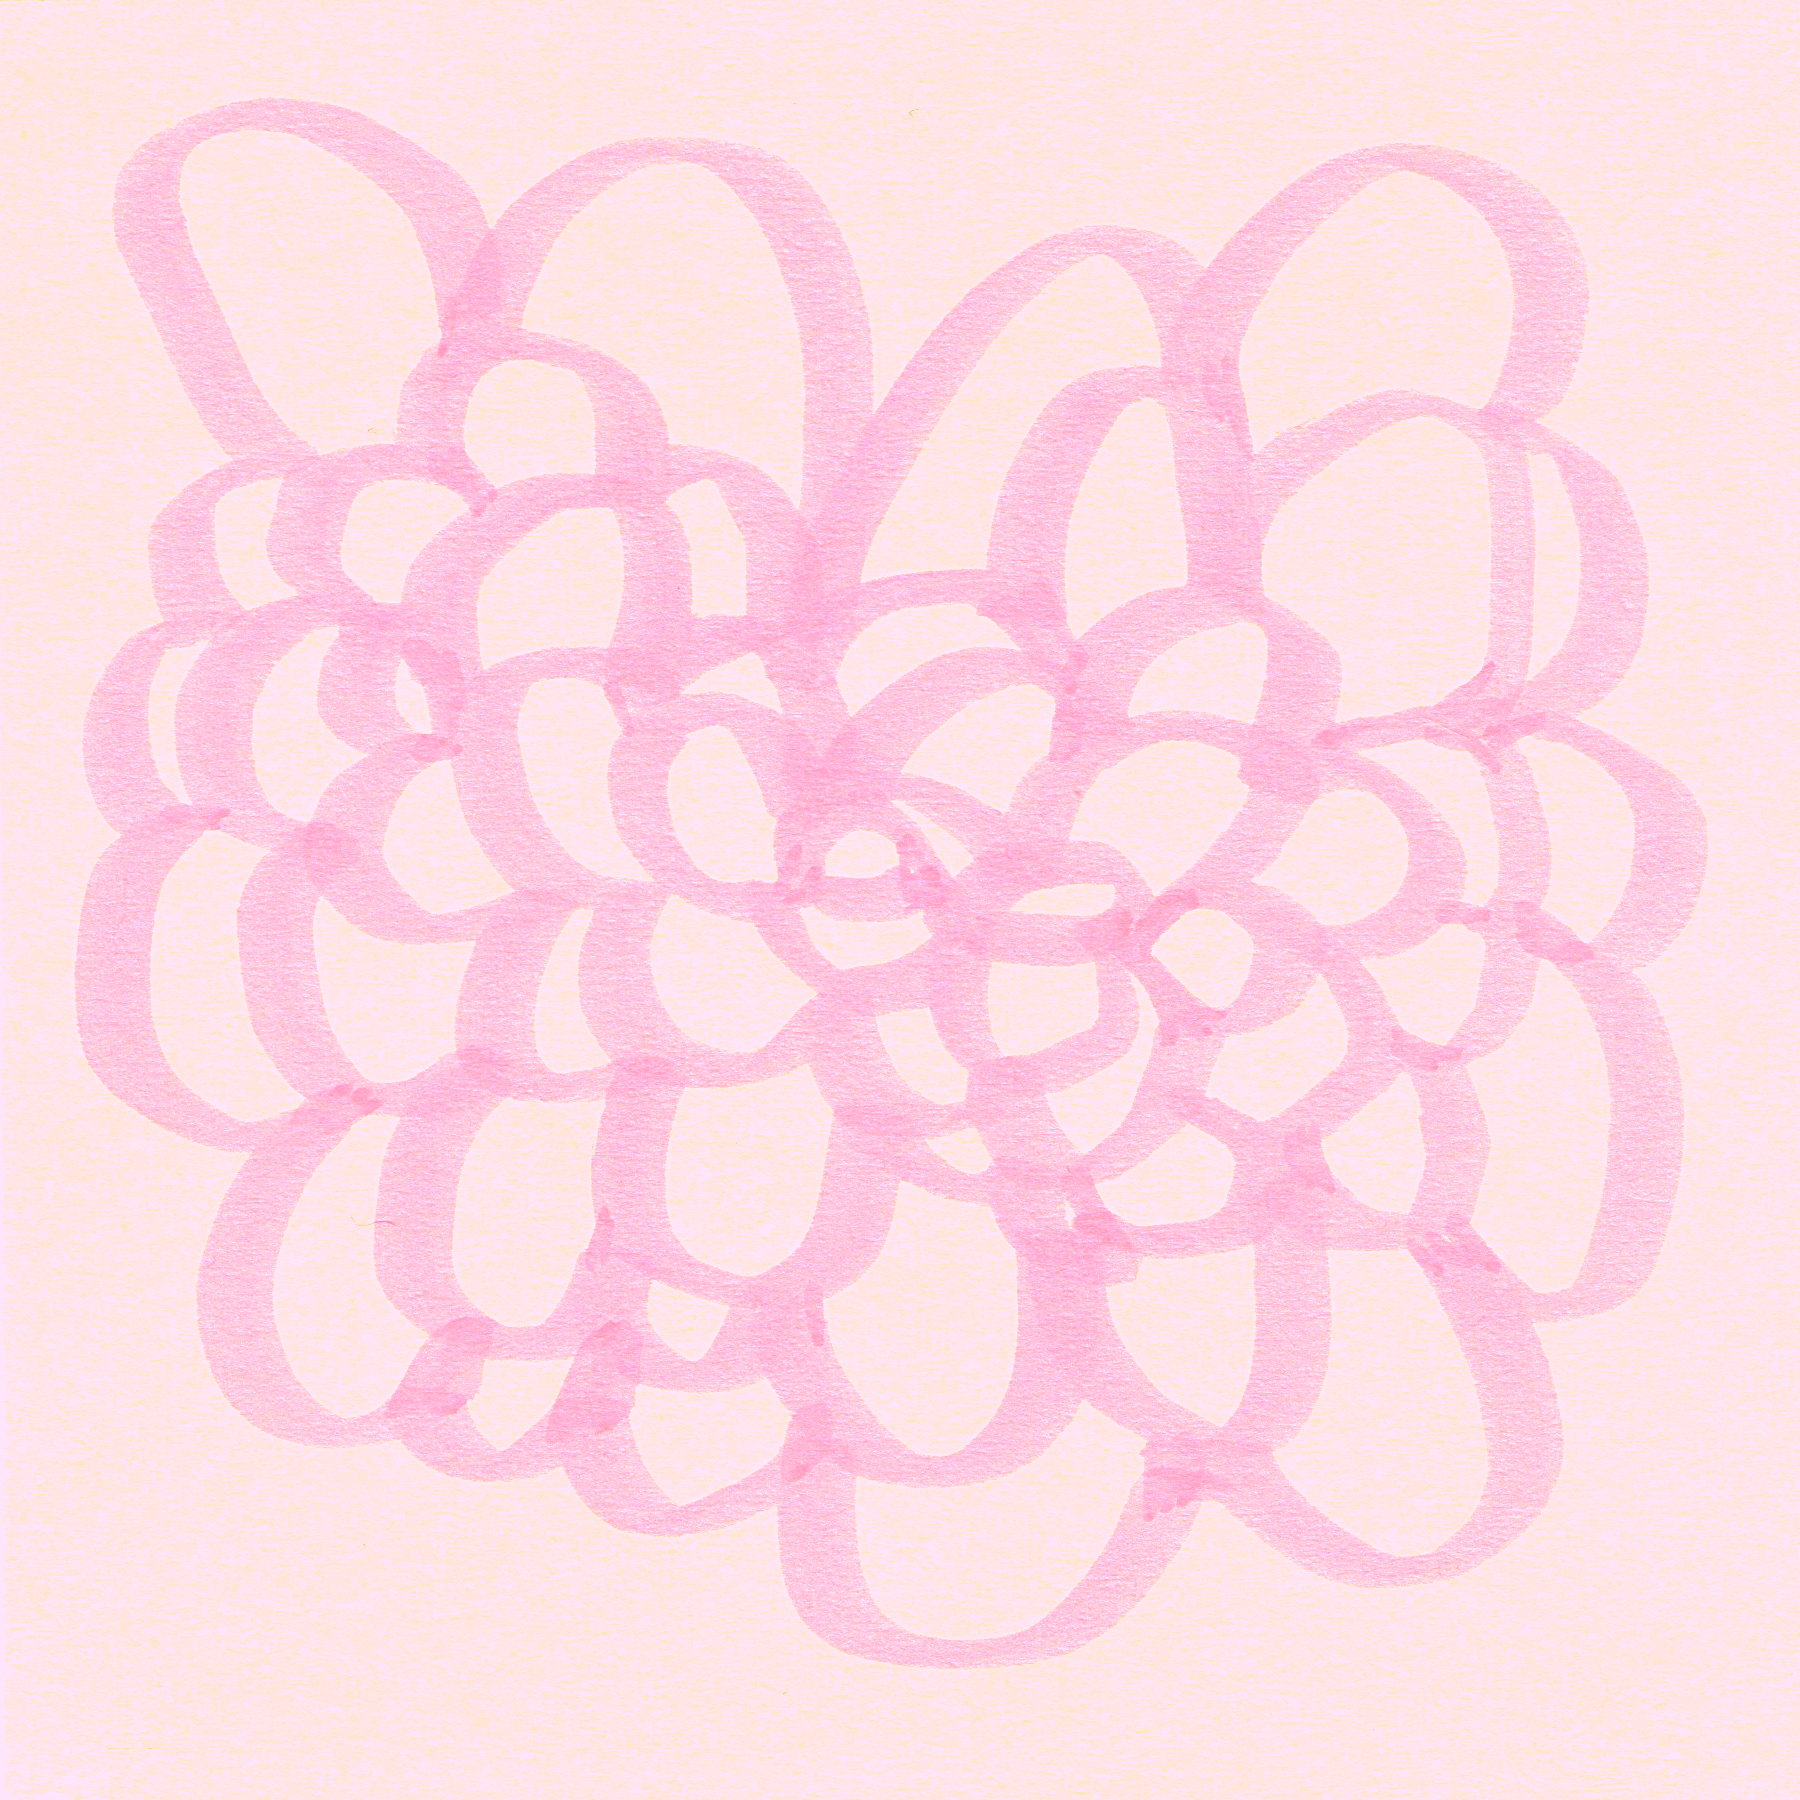 pink blobs drawn on a lighter pink background